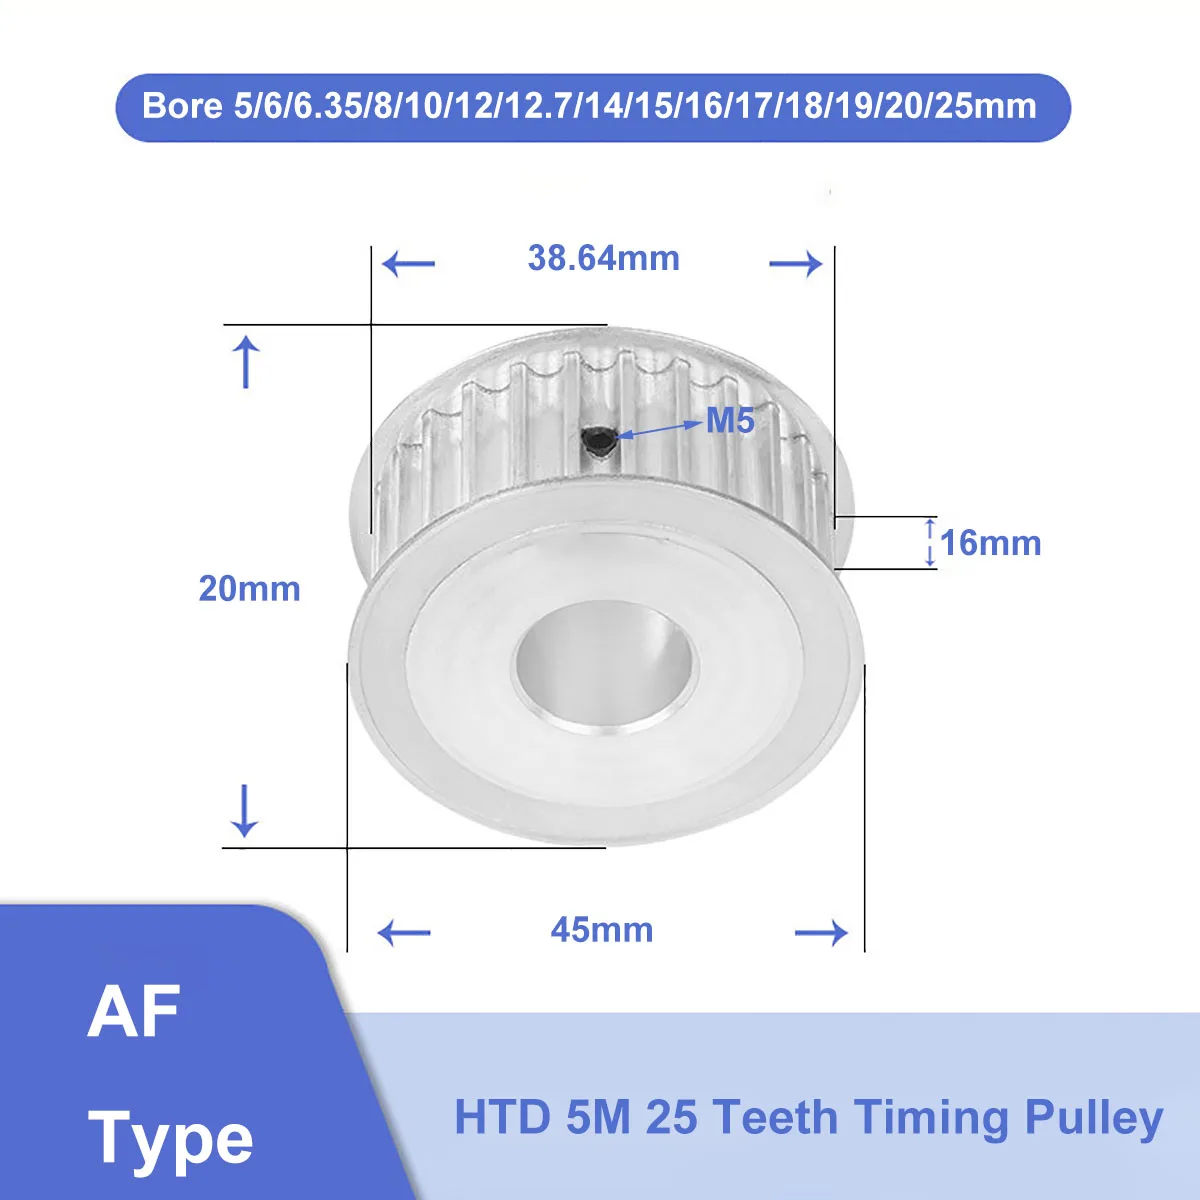 

HTD 5M 25 Teeth Timing Pulley Synchronus Wheel Bore 6mm - 25mm Aluminium Idler Pulley 5M-25T 16mm Width For HTD5M Timing Belt